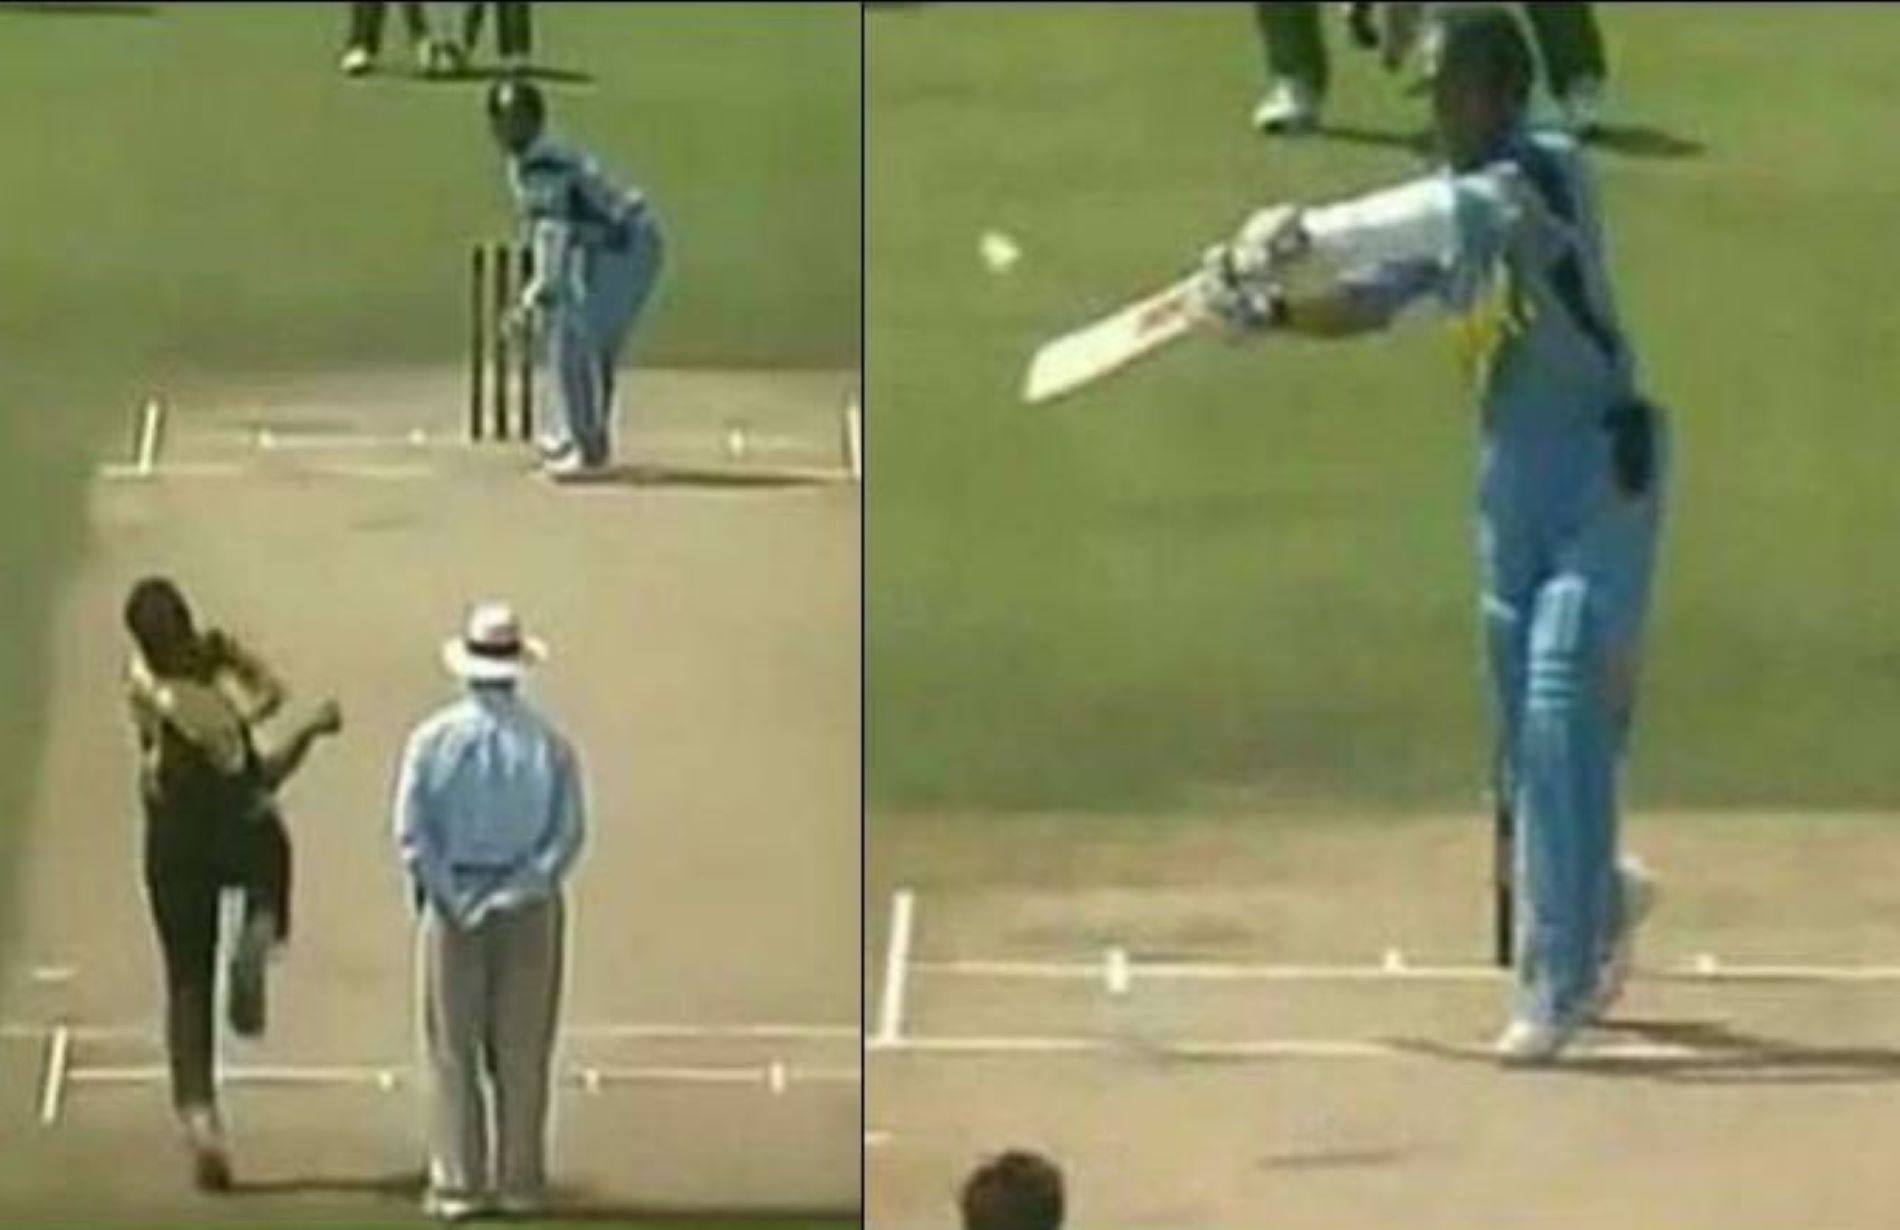 Tendulkar launched a brutal attack on Pakistan in the 2003 World Cup clash.